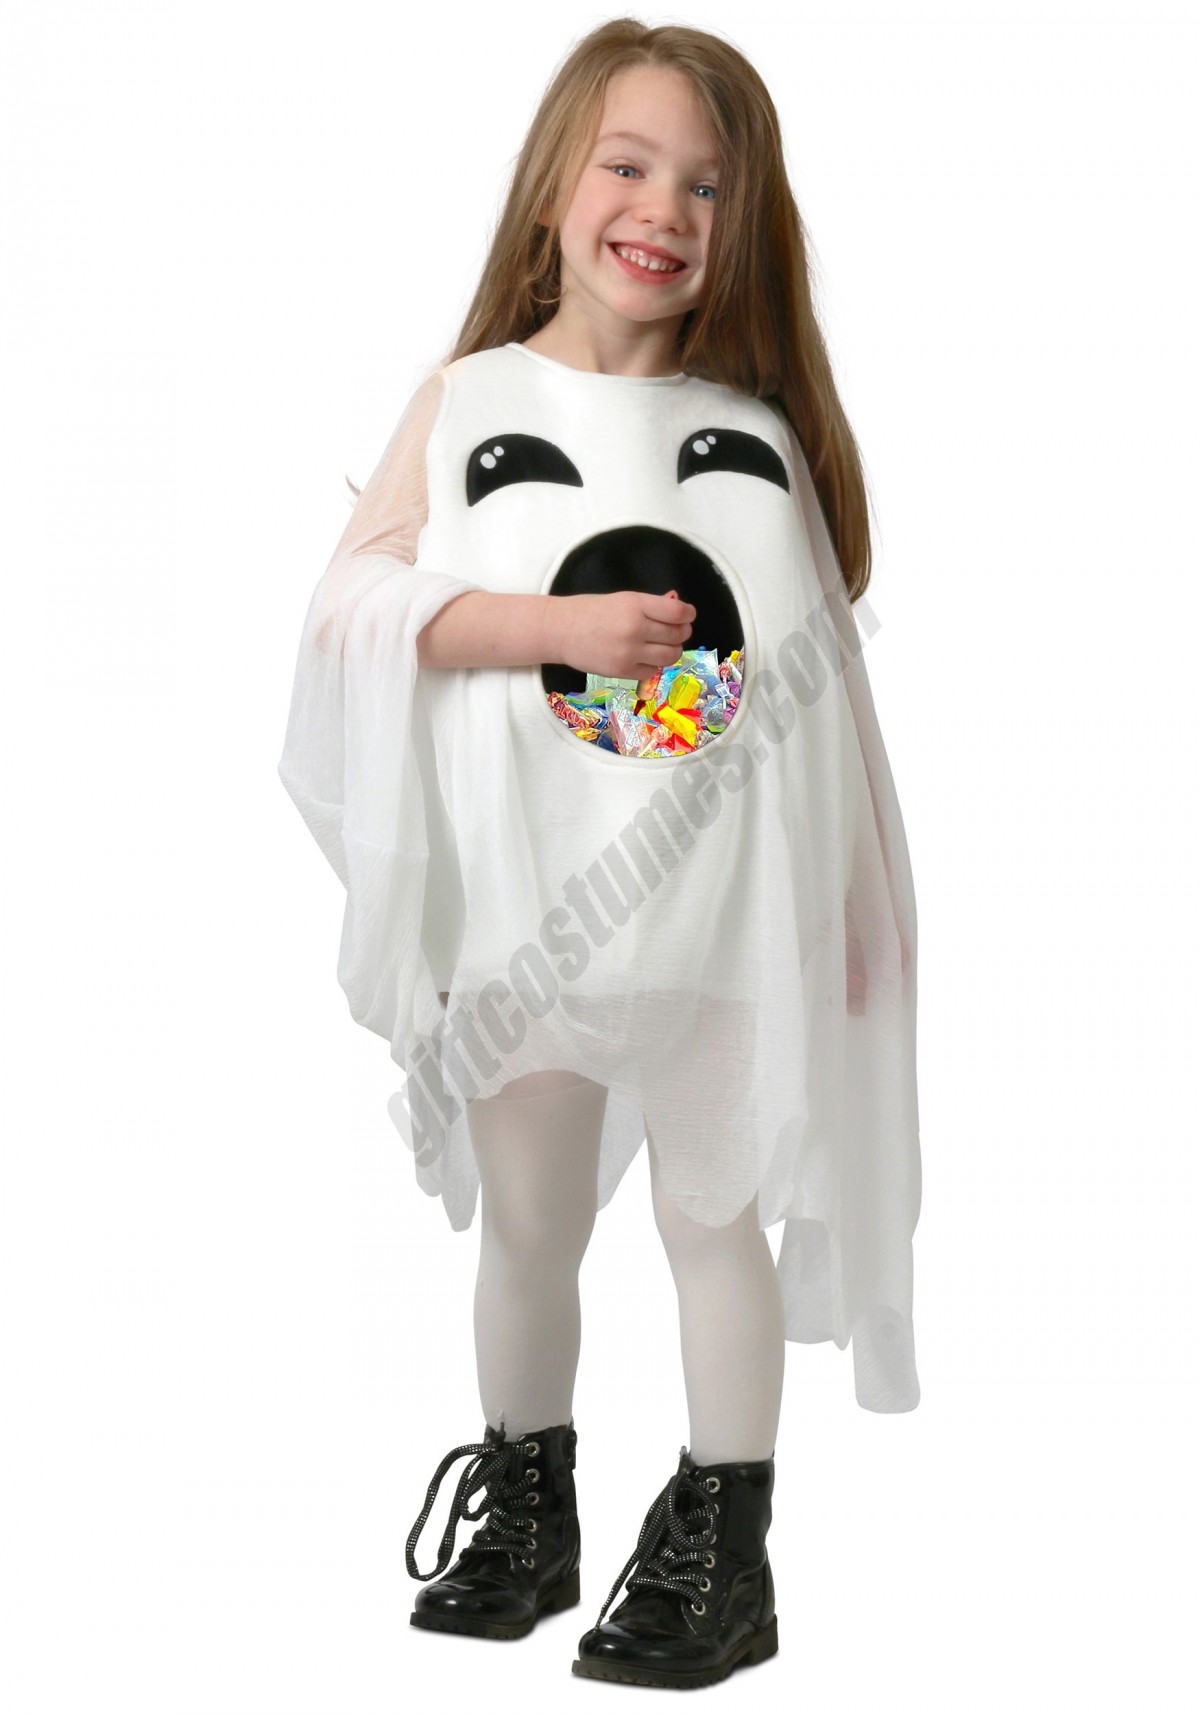 Feed Me Ghost Costume for Kids Promotions - -0